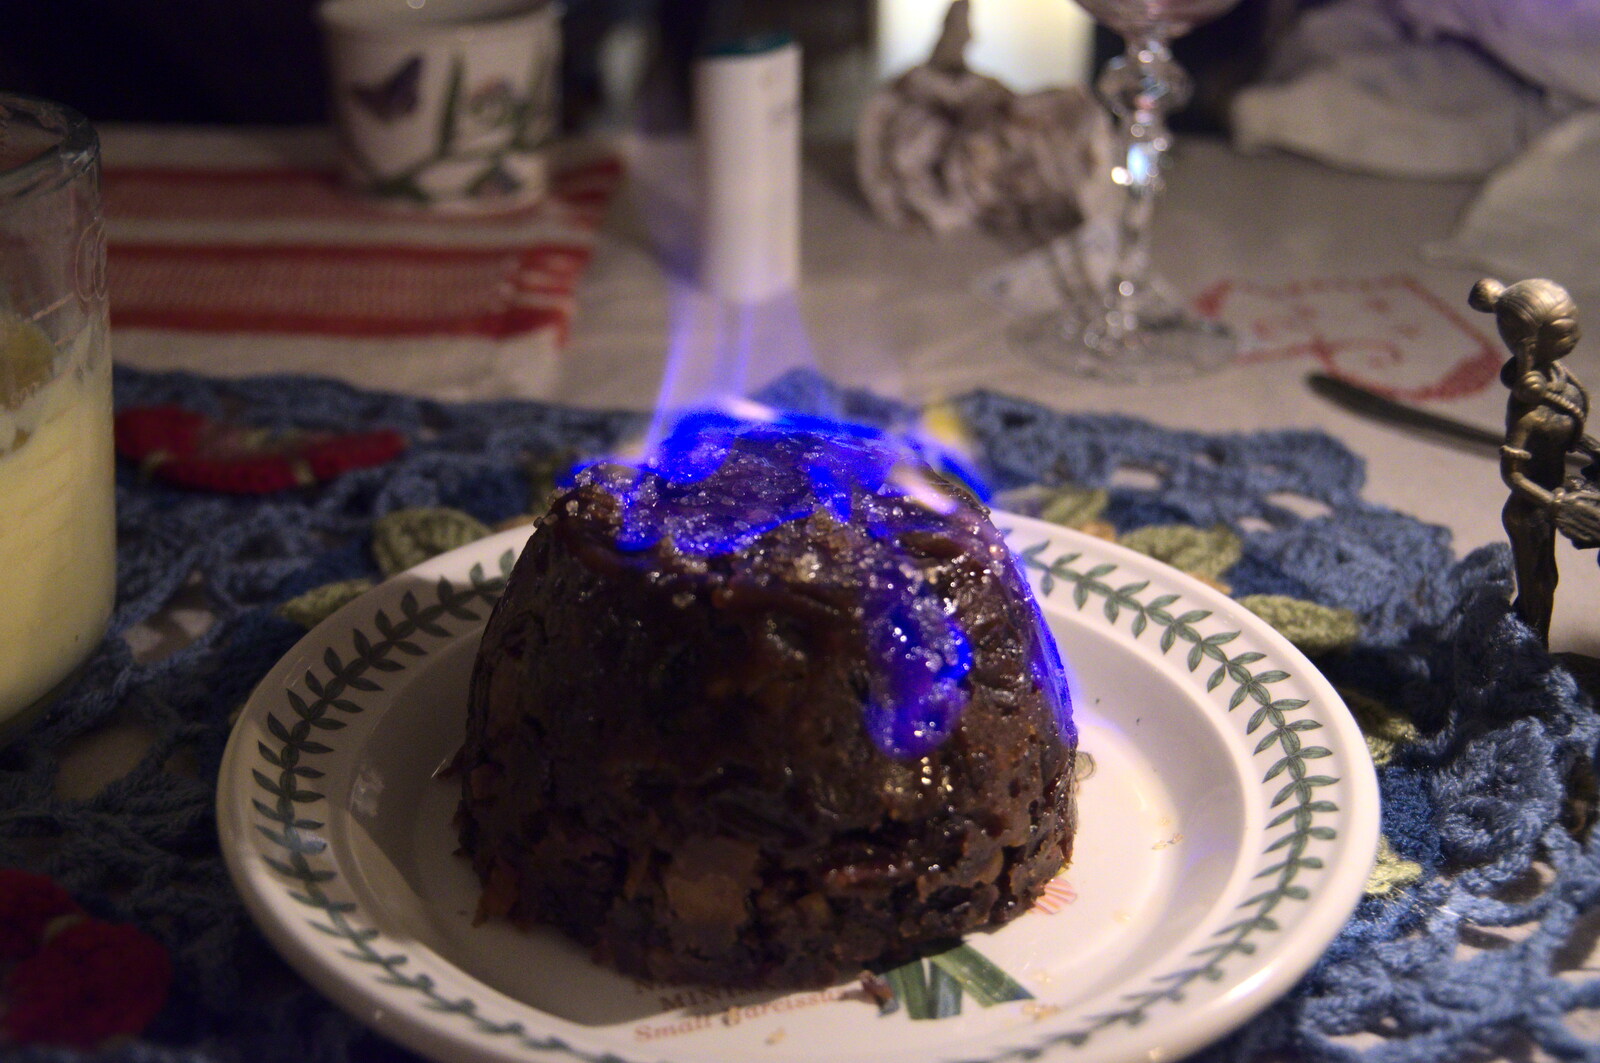 The Christmas pudding is on fire from Christmas Day, Brome, Suffolk - 25th December 2020